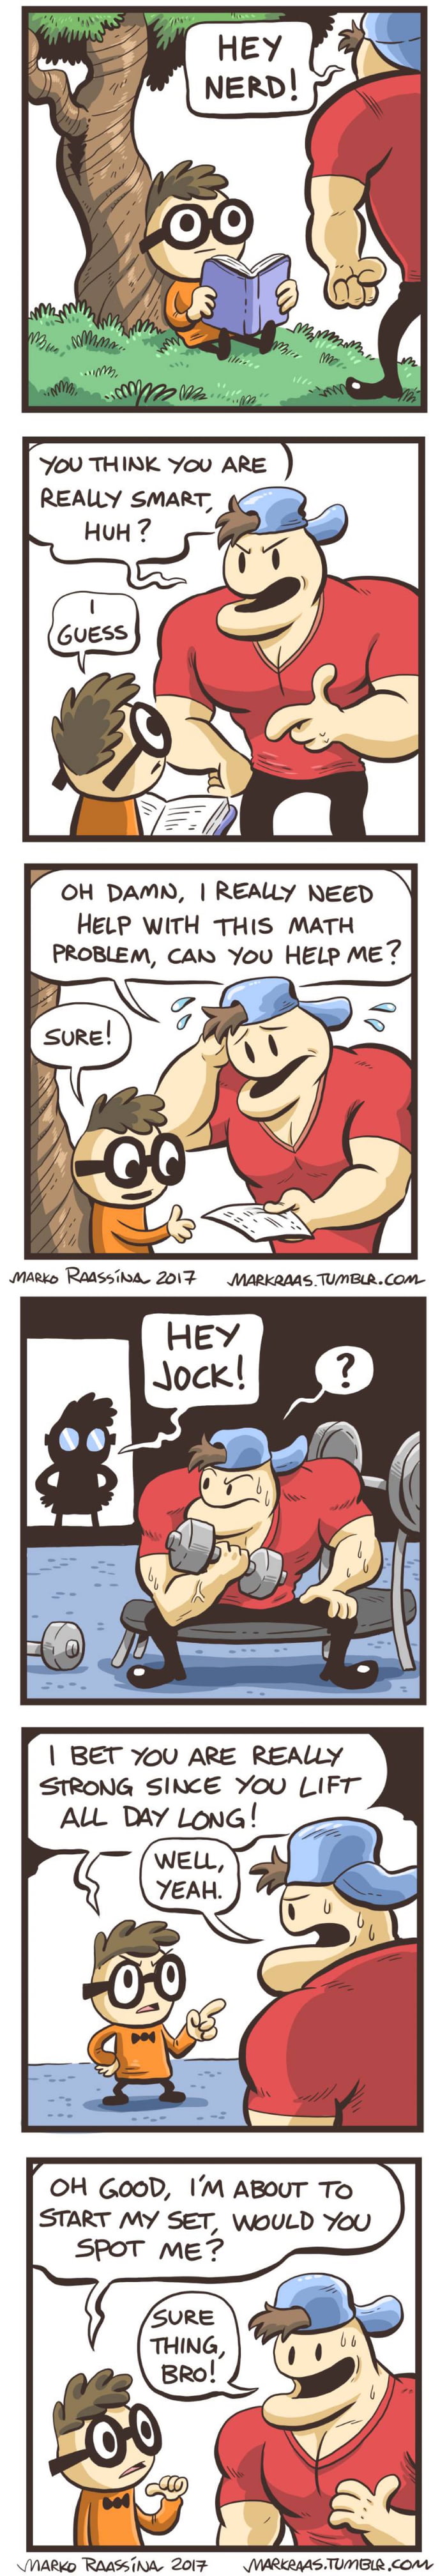 The nerd and the jock ch.1 and 2